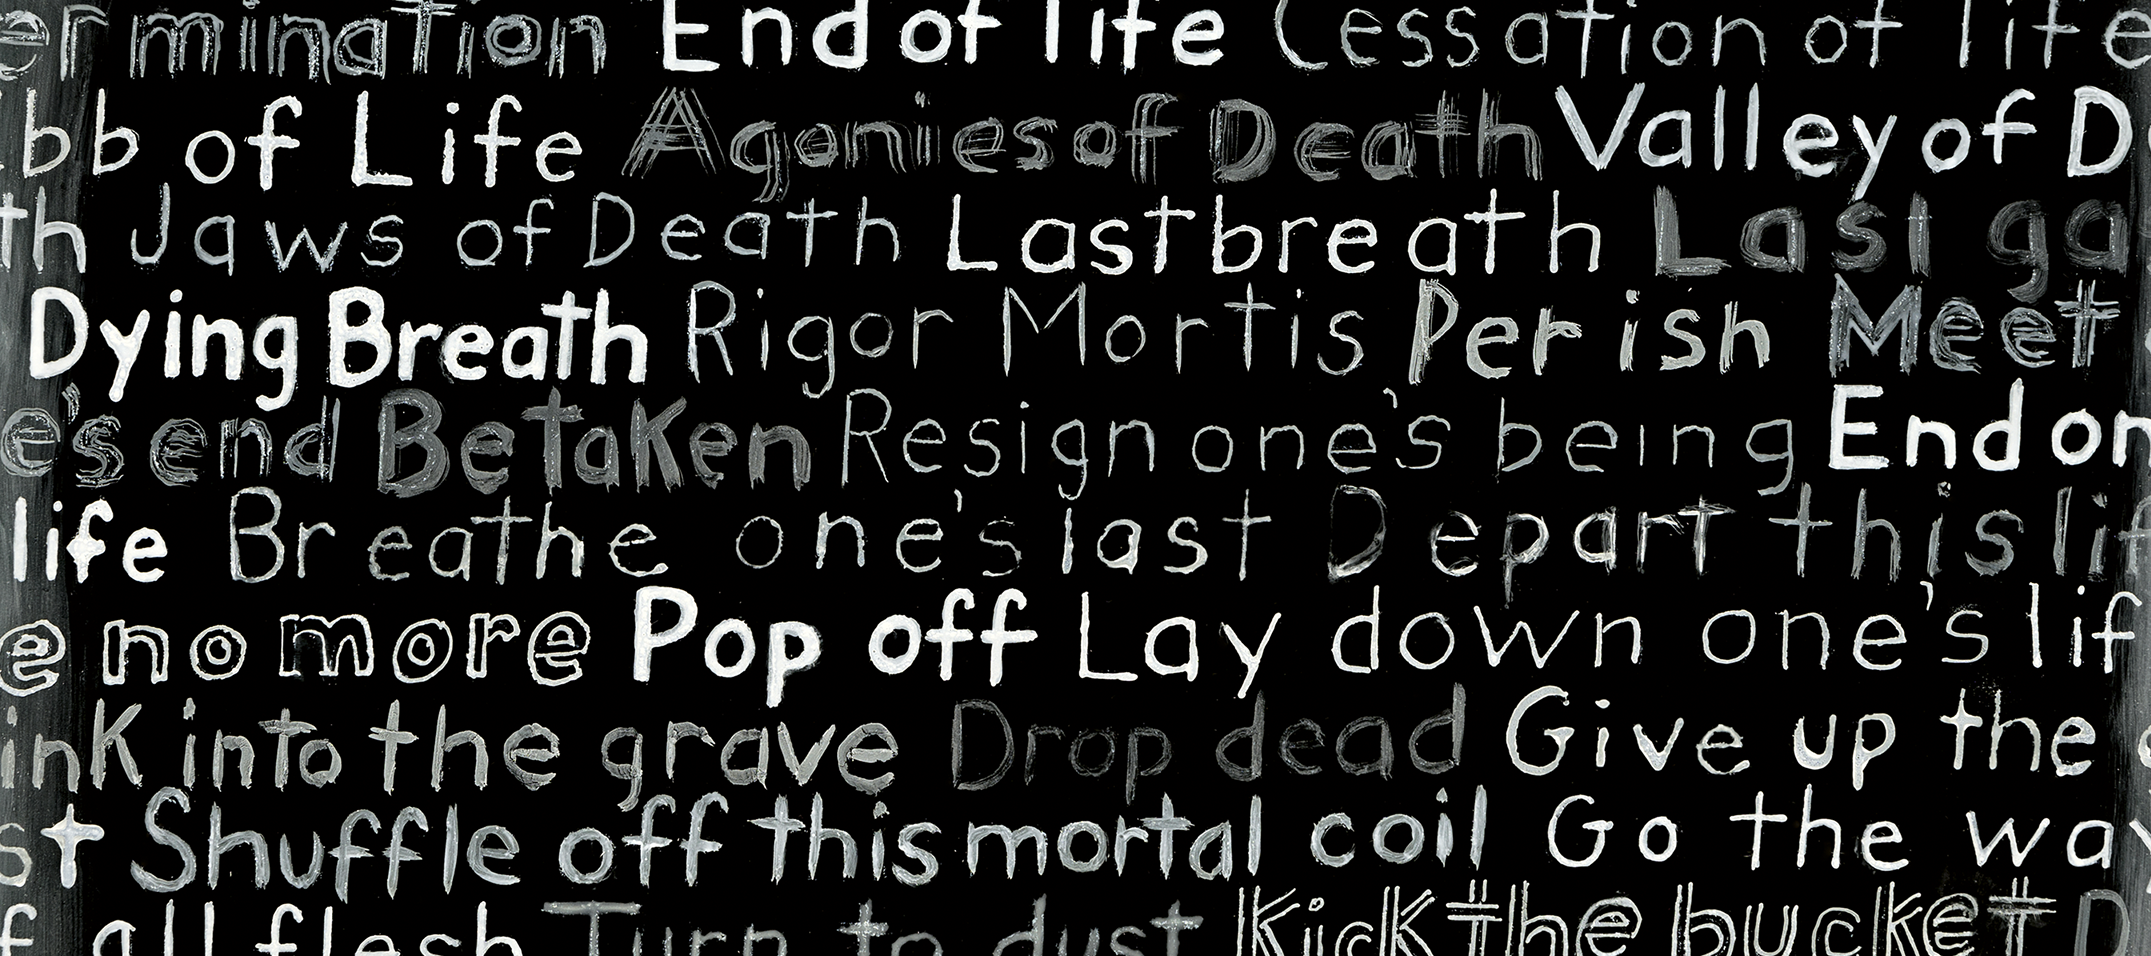 Painted black glass with handwritten words in white paint relating to death and dying, such as, 'End of Life,' 'Rigor Mortis,' 'Pop off,' 'Dead as a doornail.'